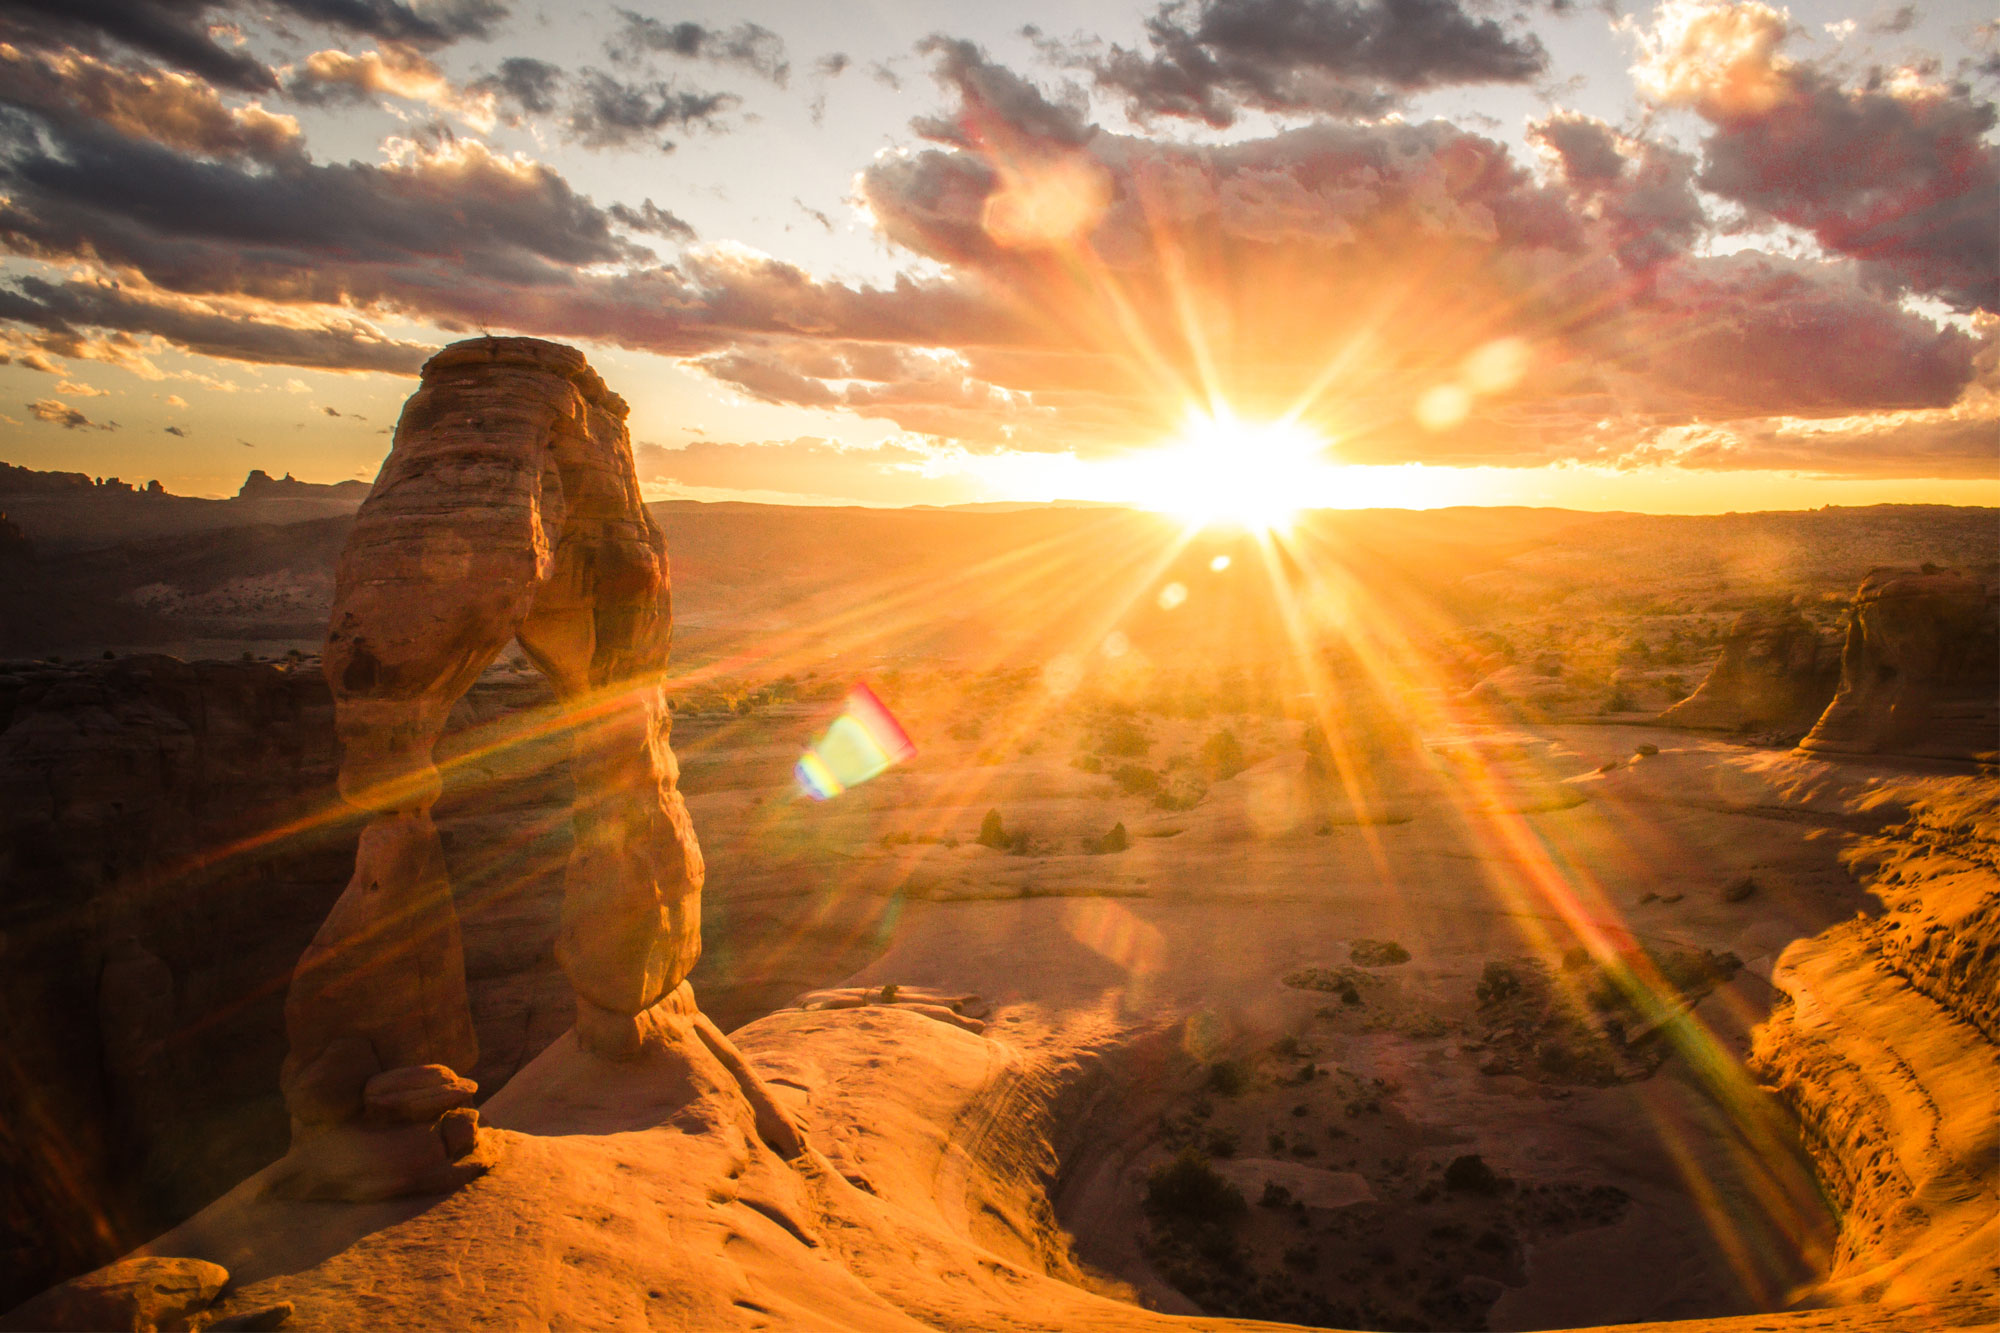 Delicate Arch at Sunset, Arches National Park